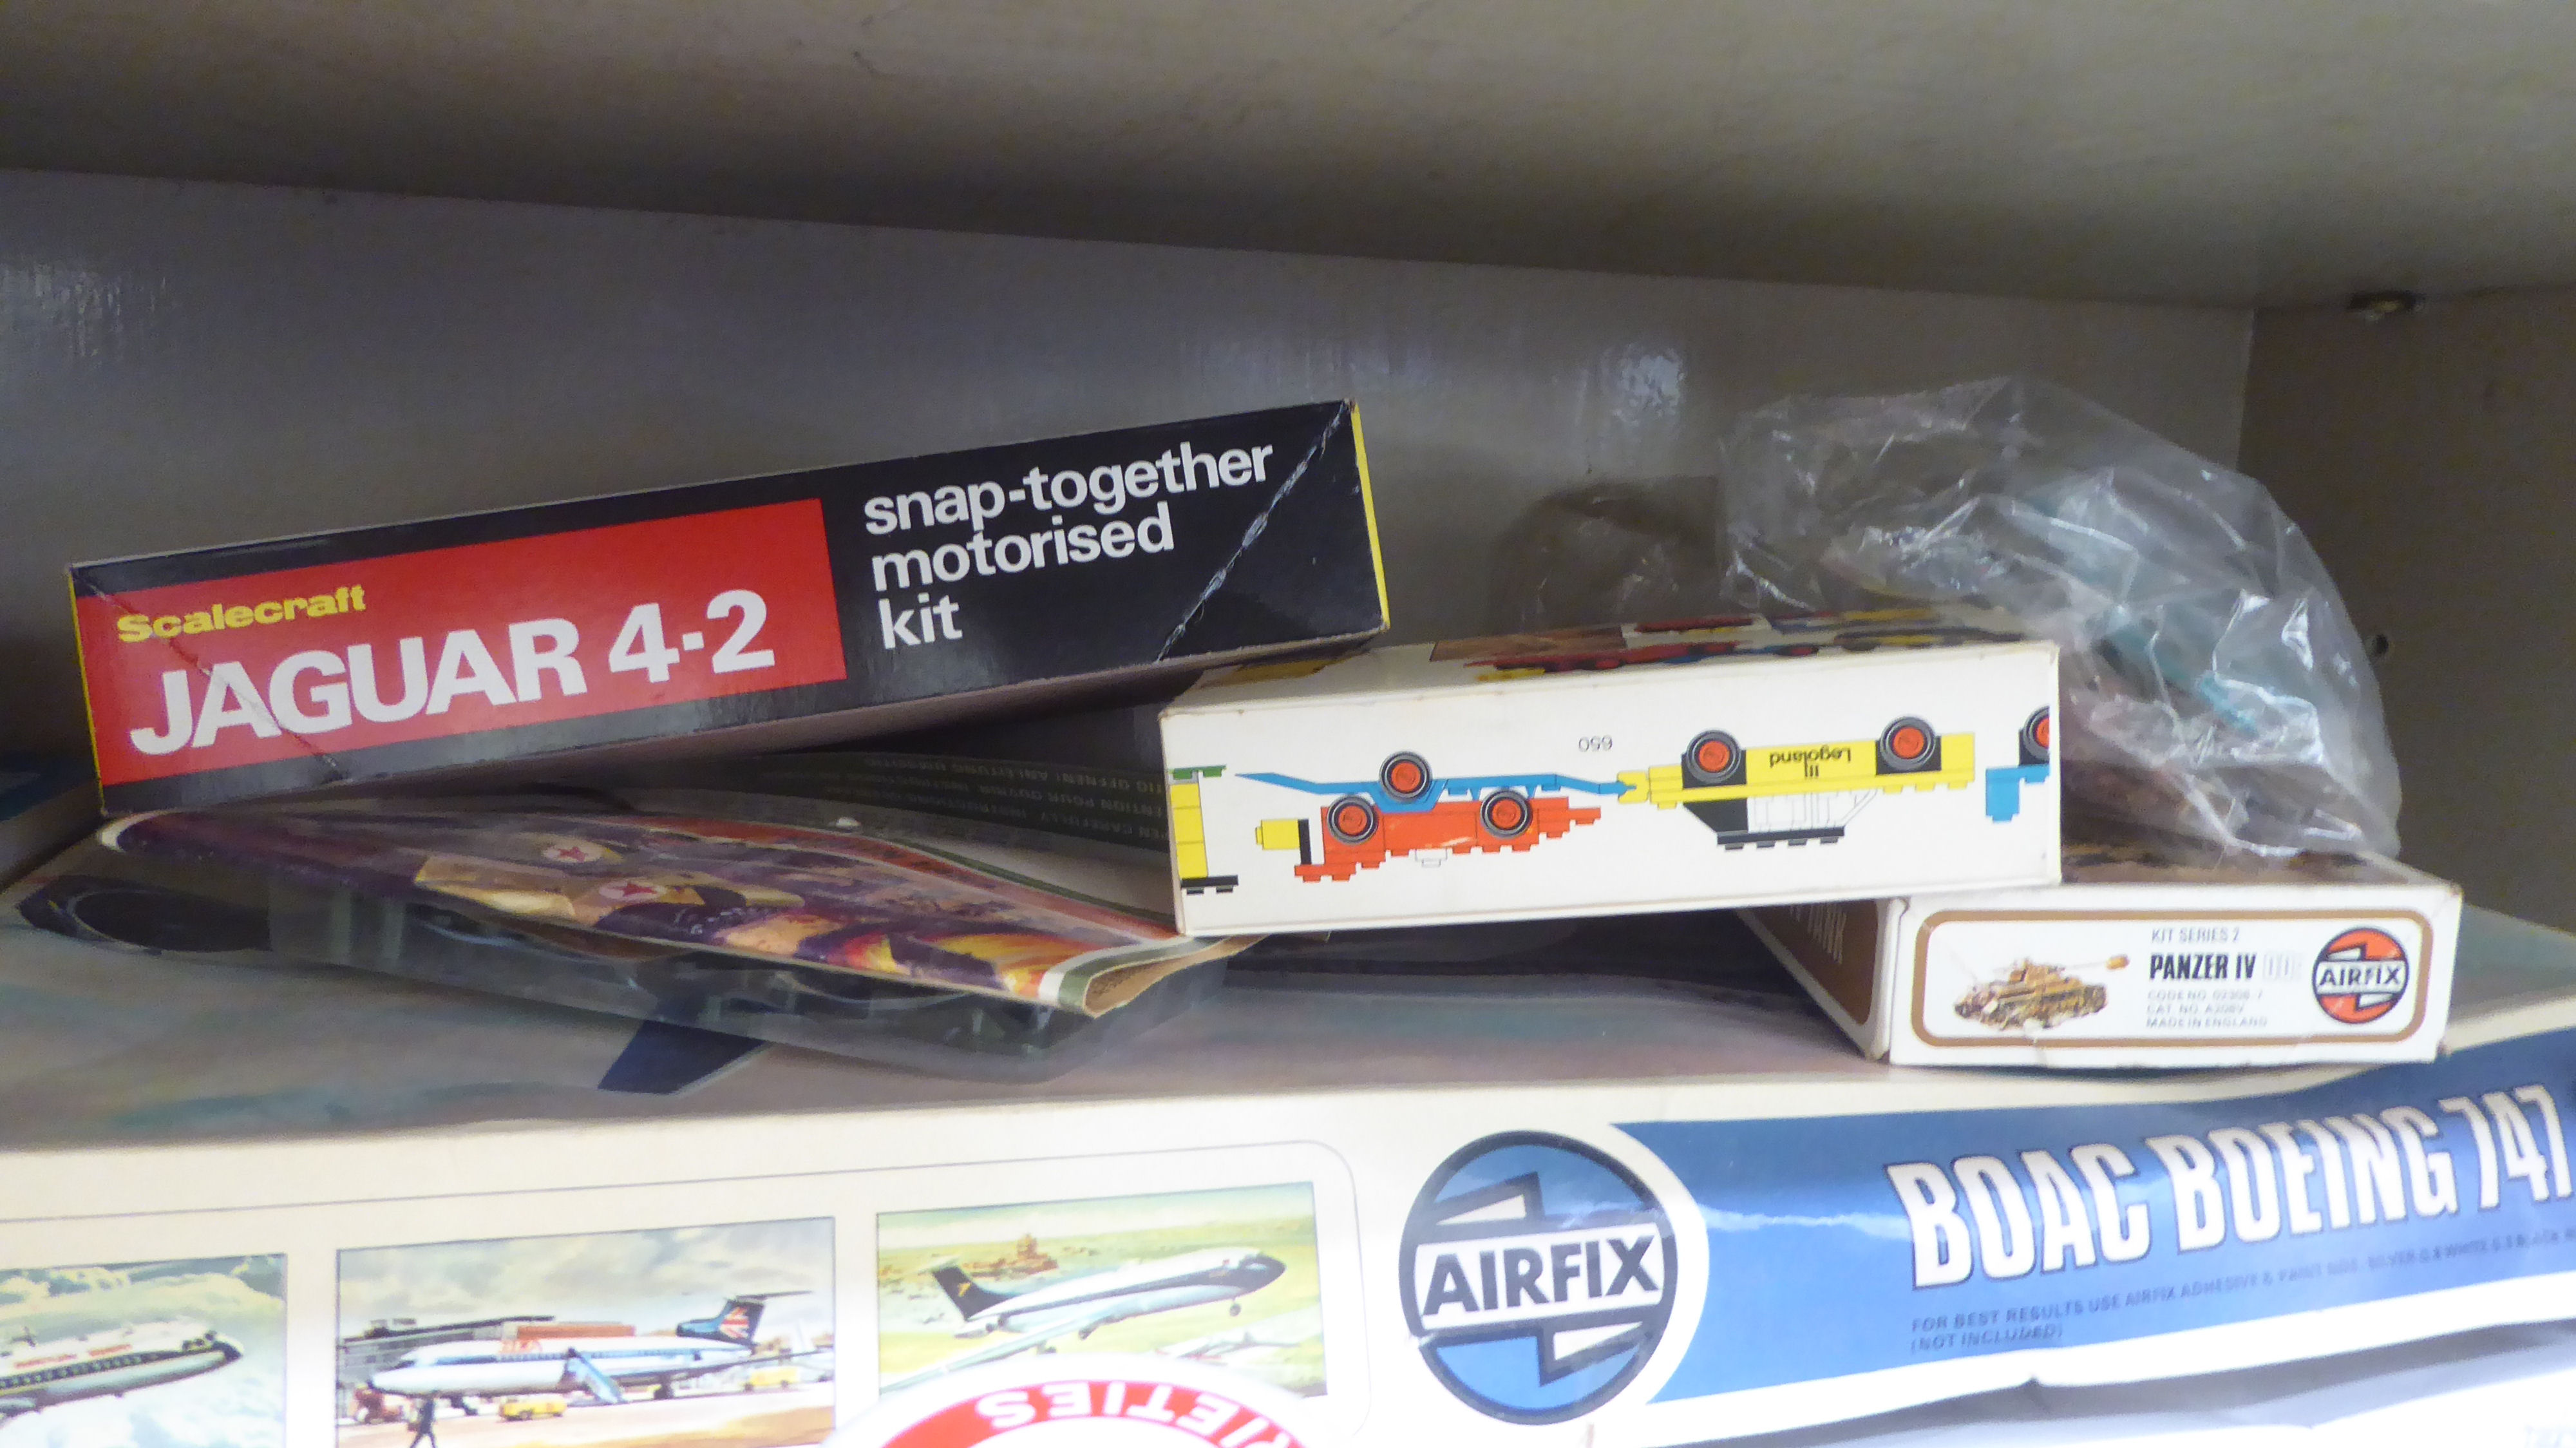 Airfix kits and figures: to include a BOAC Boeing 747; and Waterloo French infantryman - Image 3 of 5